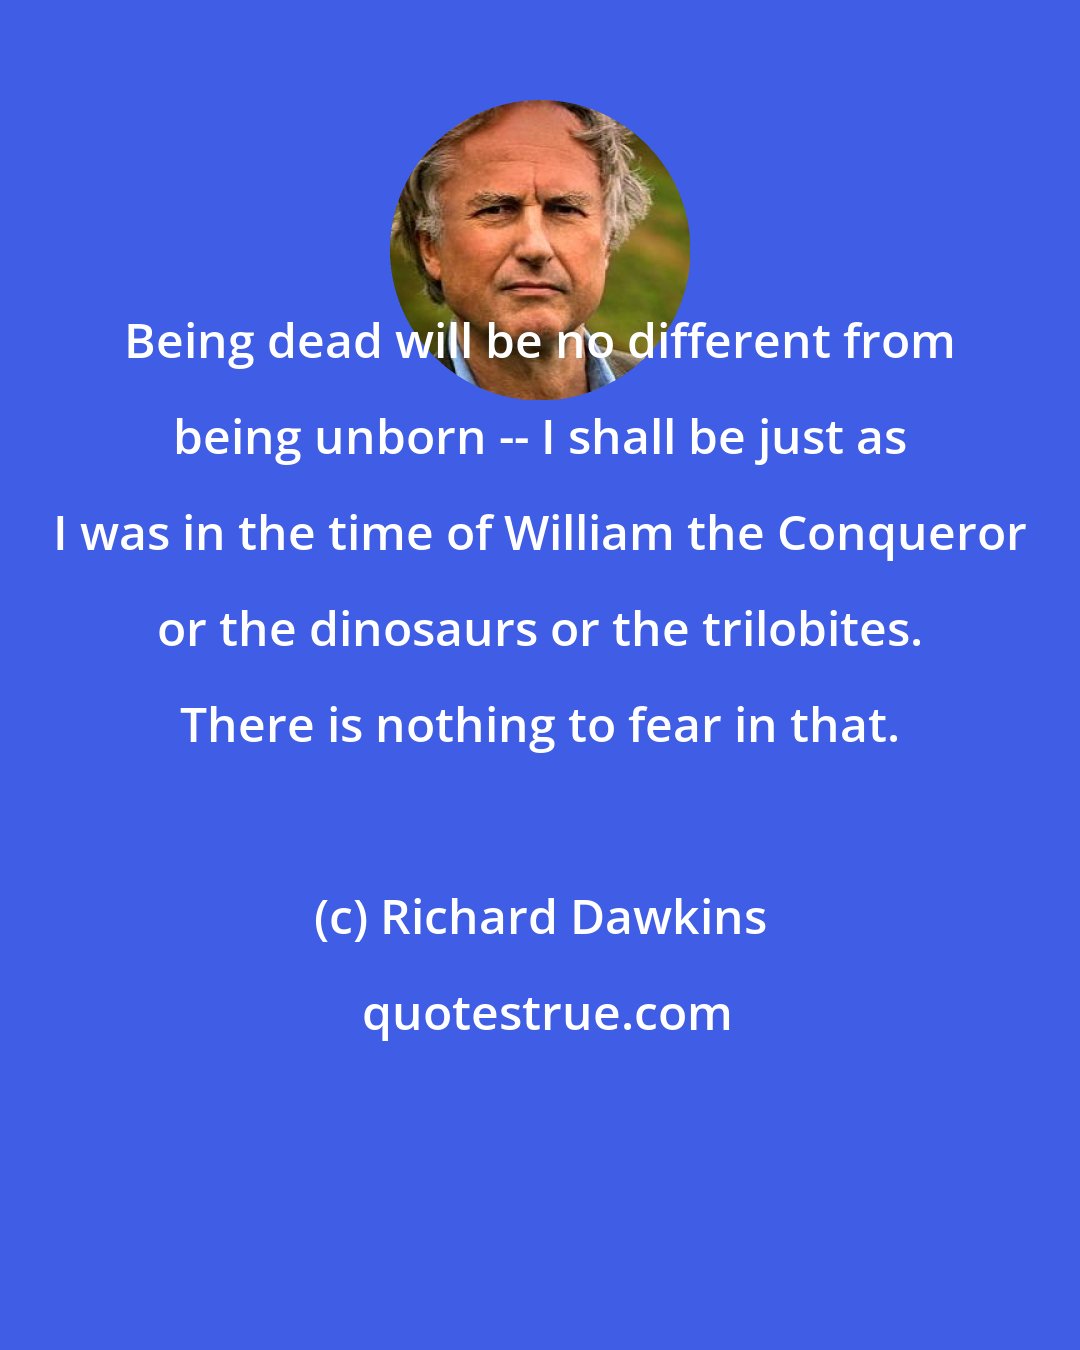 Richard Dawkins: Being dead will be no different from being unborn -- I shall be just as I was in the time of William the Conqueror or the dinosaurs or the trilobites. There is nothing to fear in that.